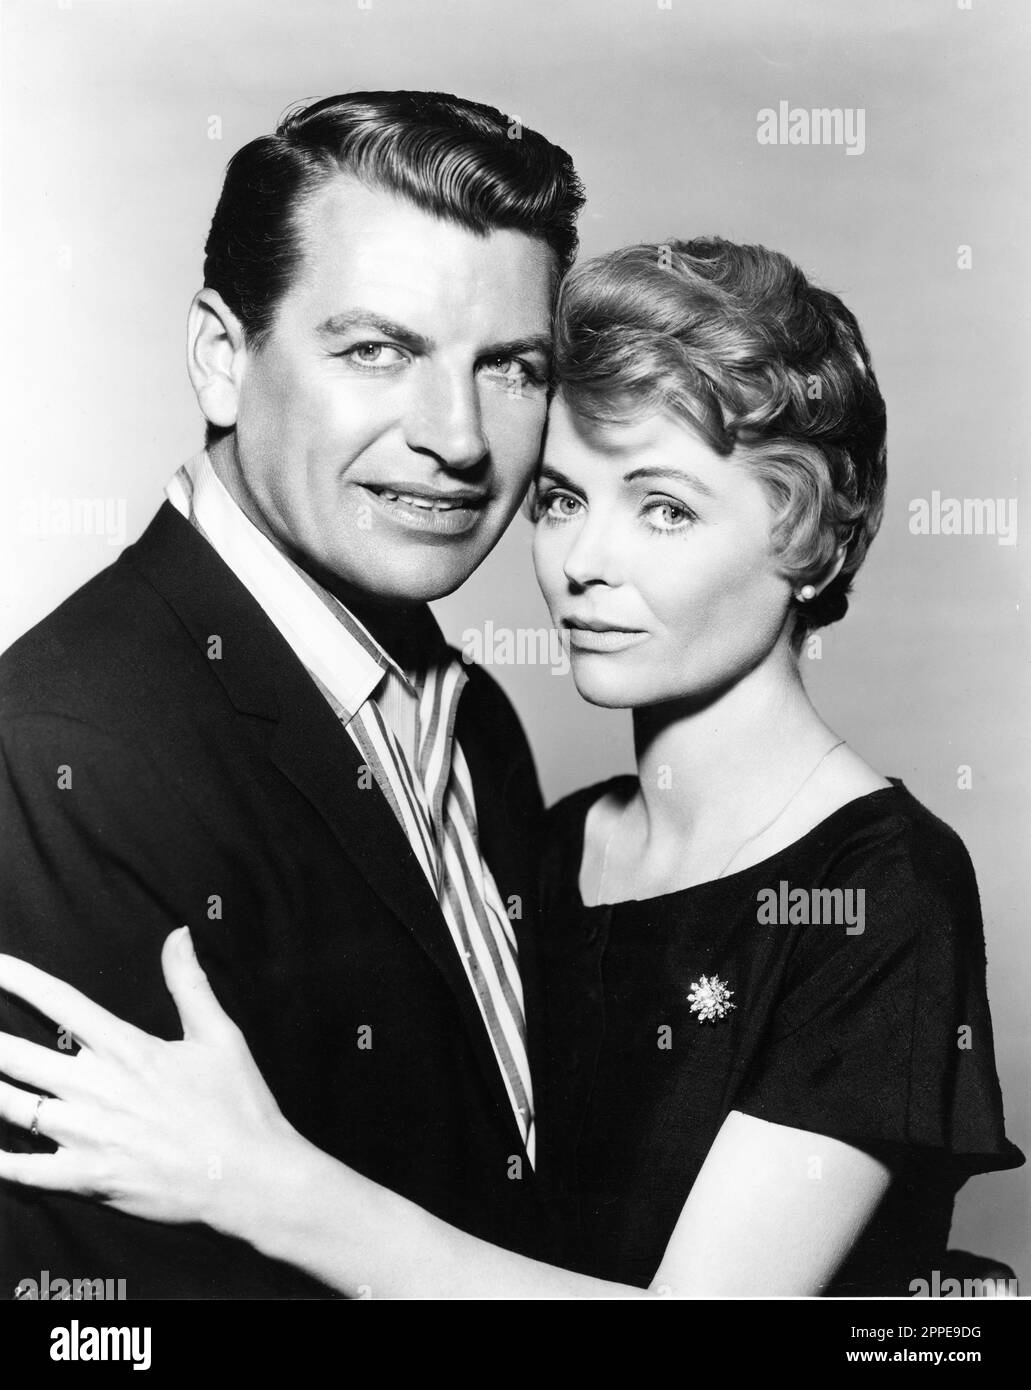 RICHARD EGAN and DOROTHY McGUIRE Portrait in A SUMMER PLACE 1959 director / screenplay DELMER DAVES novel Sloan Wilson music Max Steiner costume design Howard Shoup Warner Bros. Stock Photo